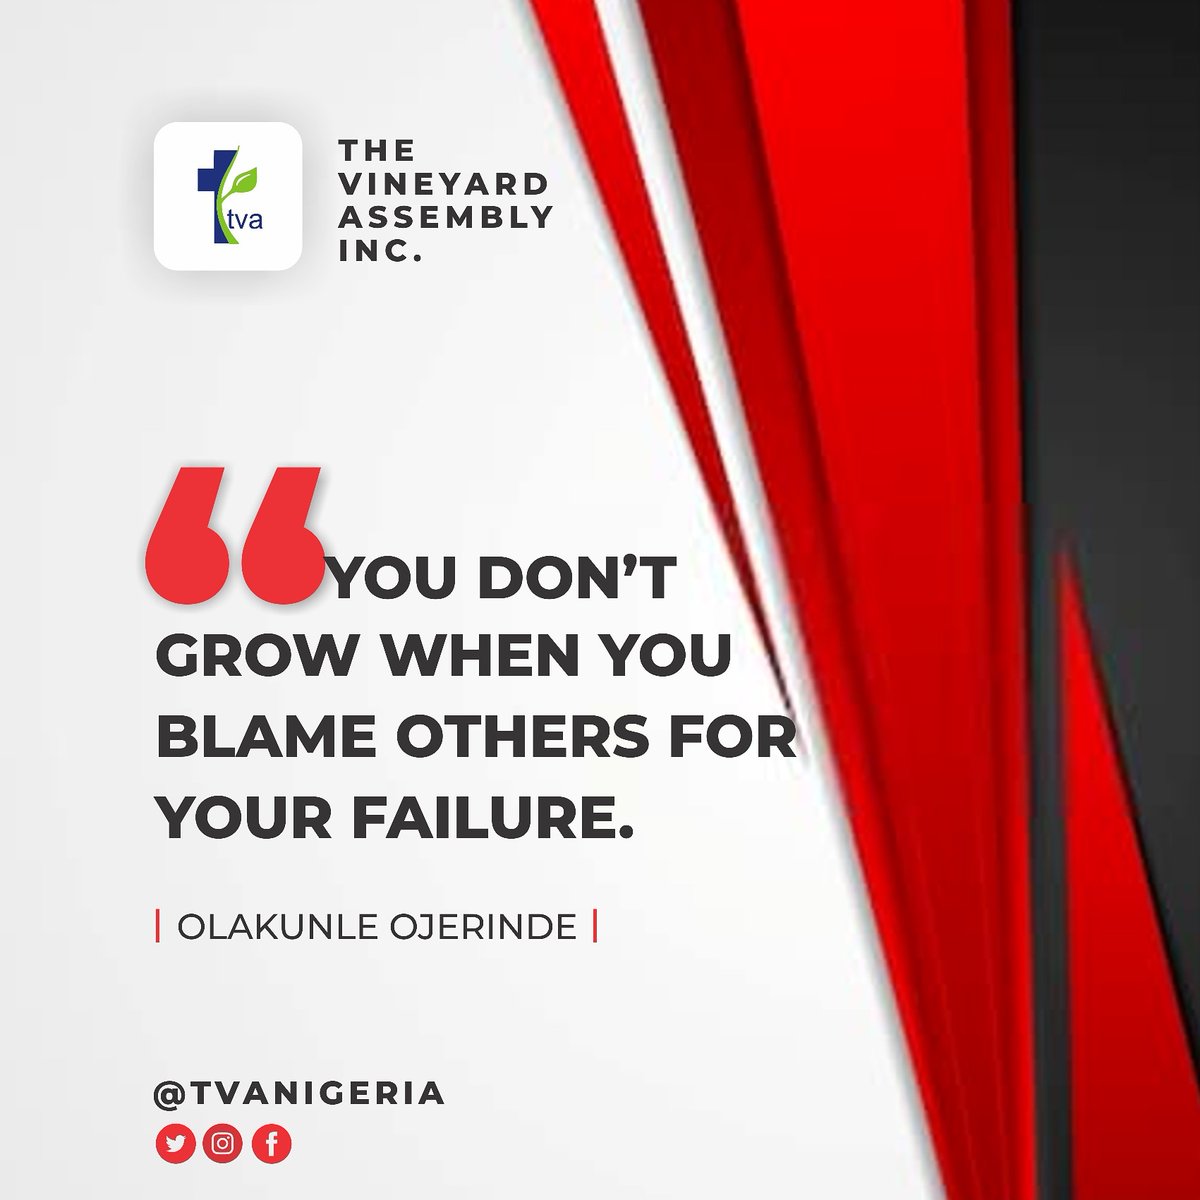 You don't grow when you blame others for your failure.
- Olakunle Ojerinde

#tvanigeria
#startwithwhatyouhave